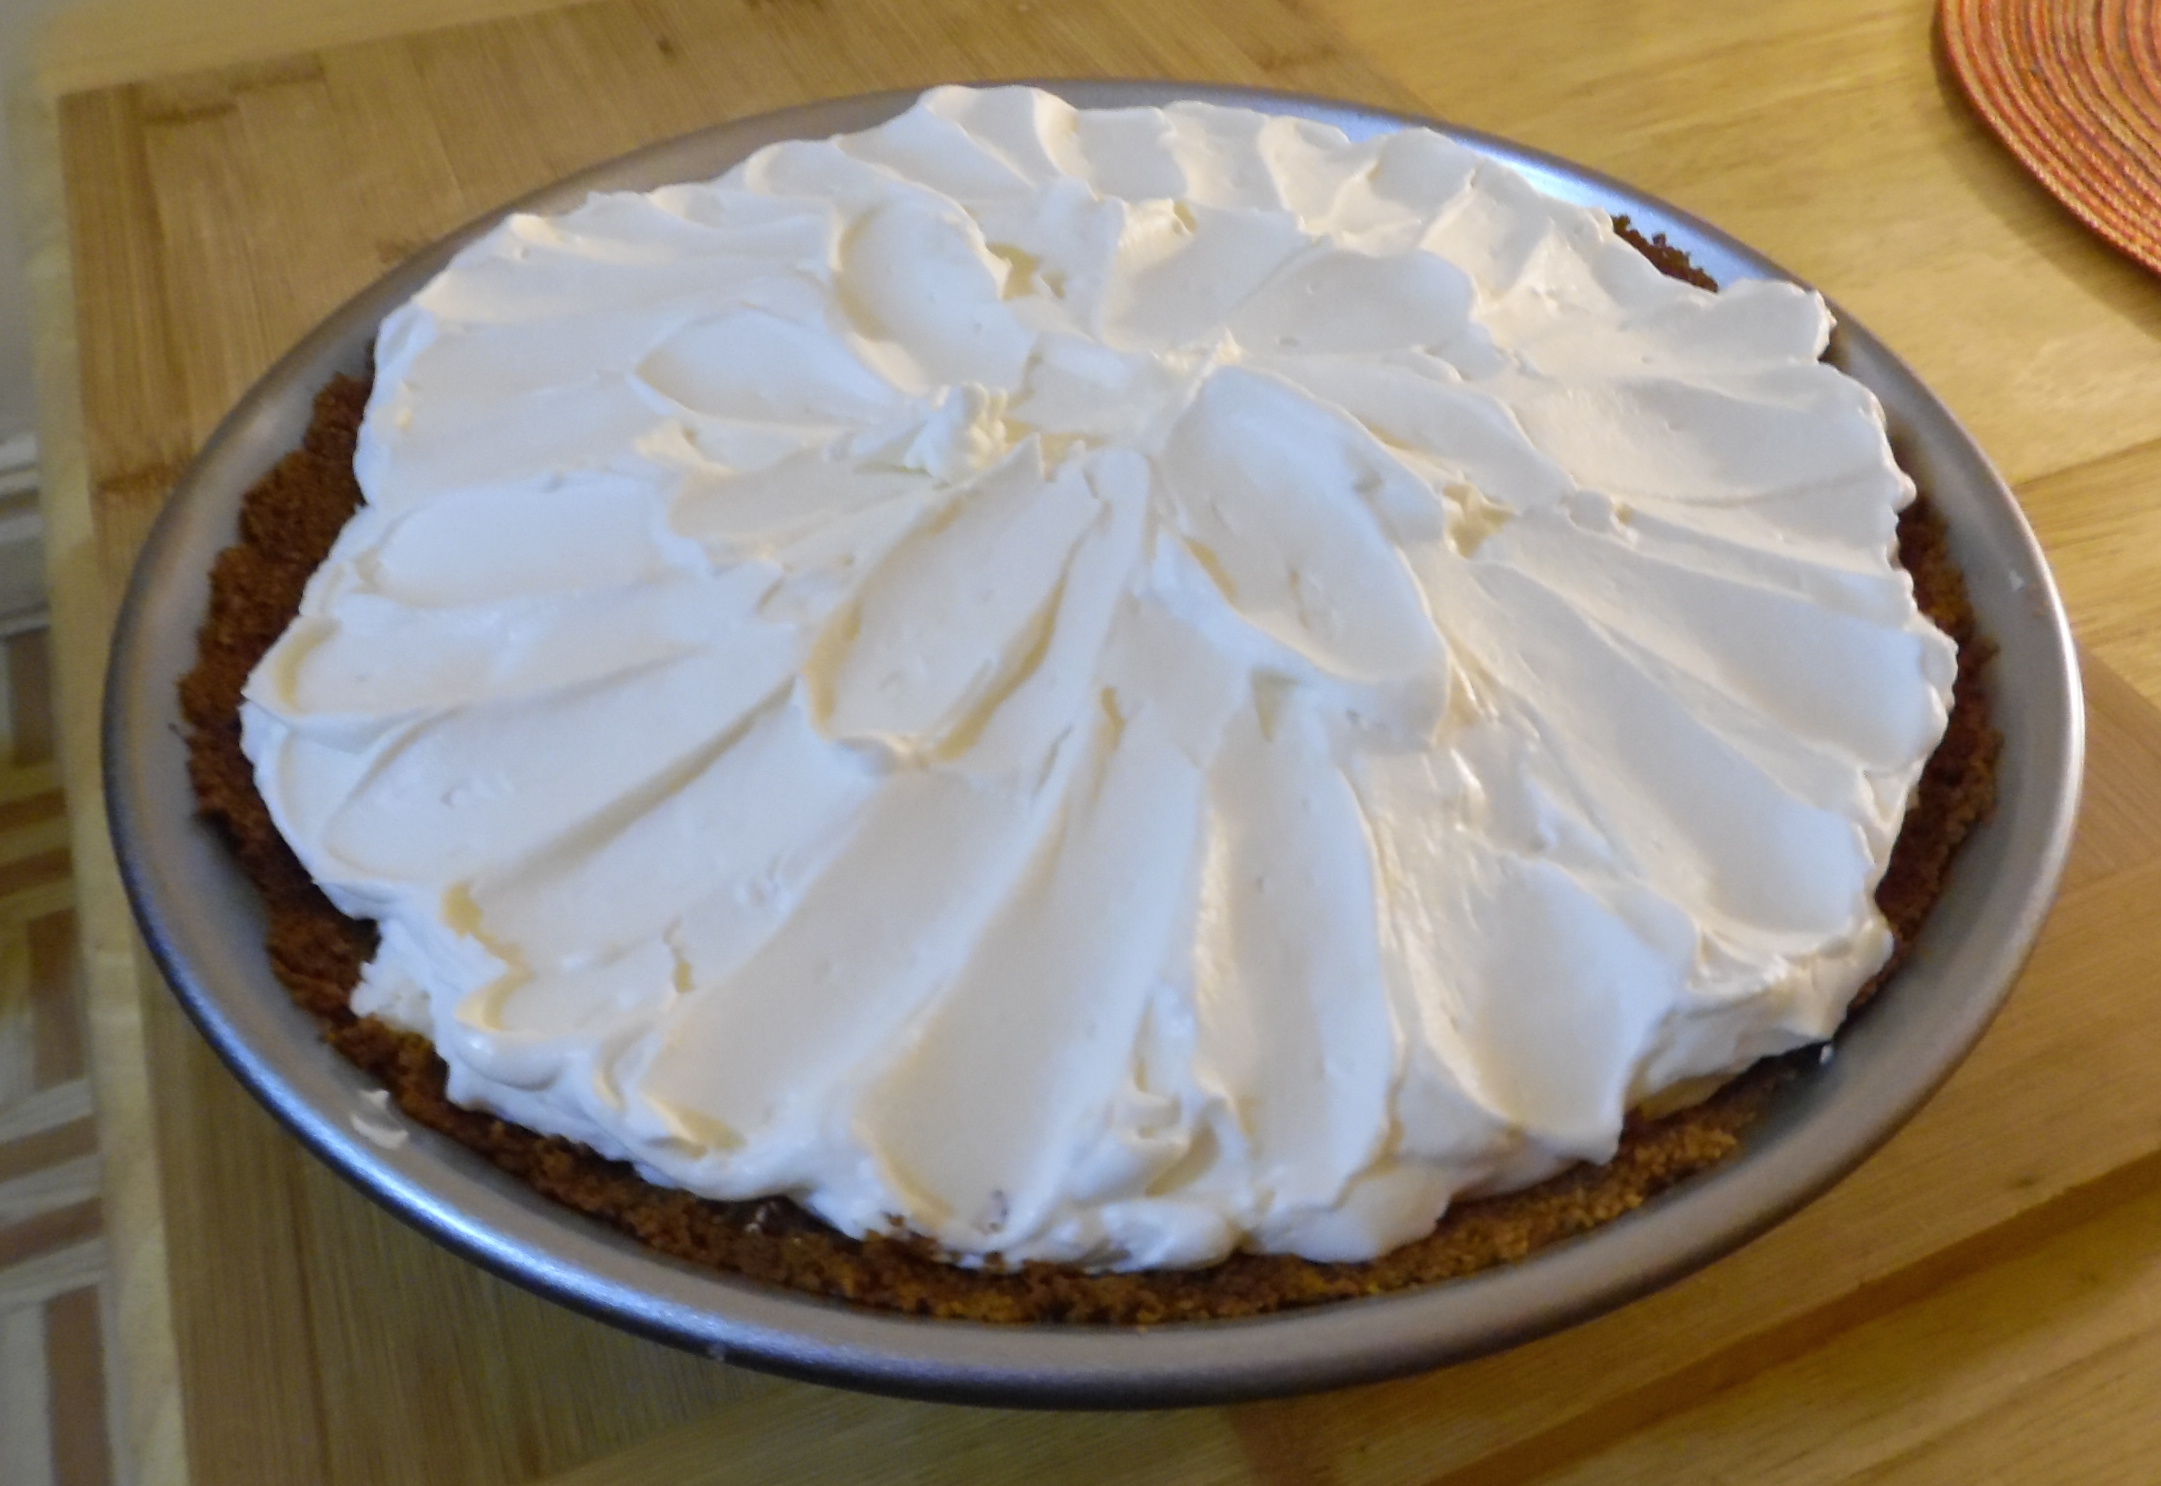 Topping spread over filled and cooled pie.